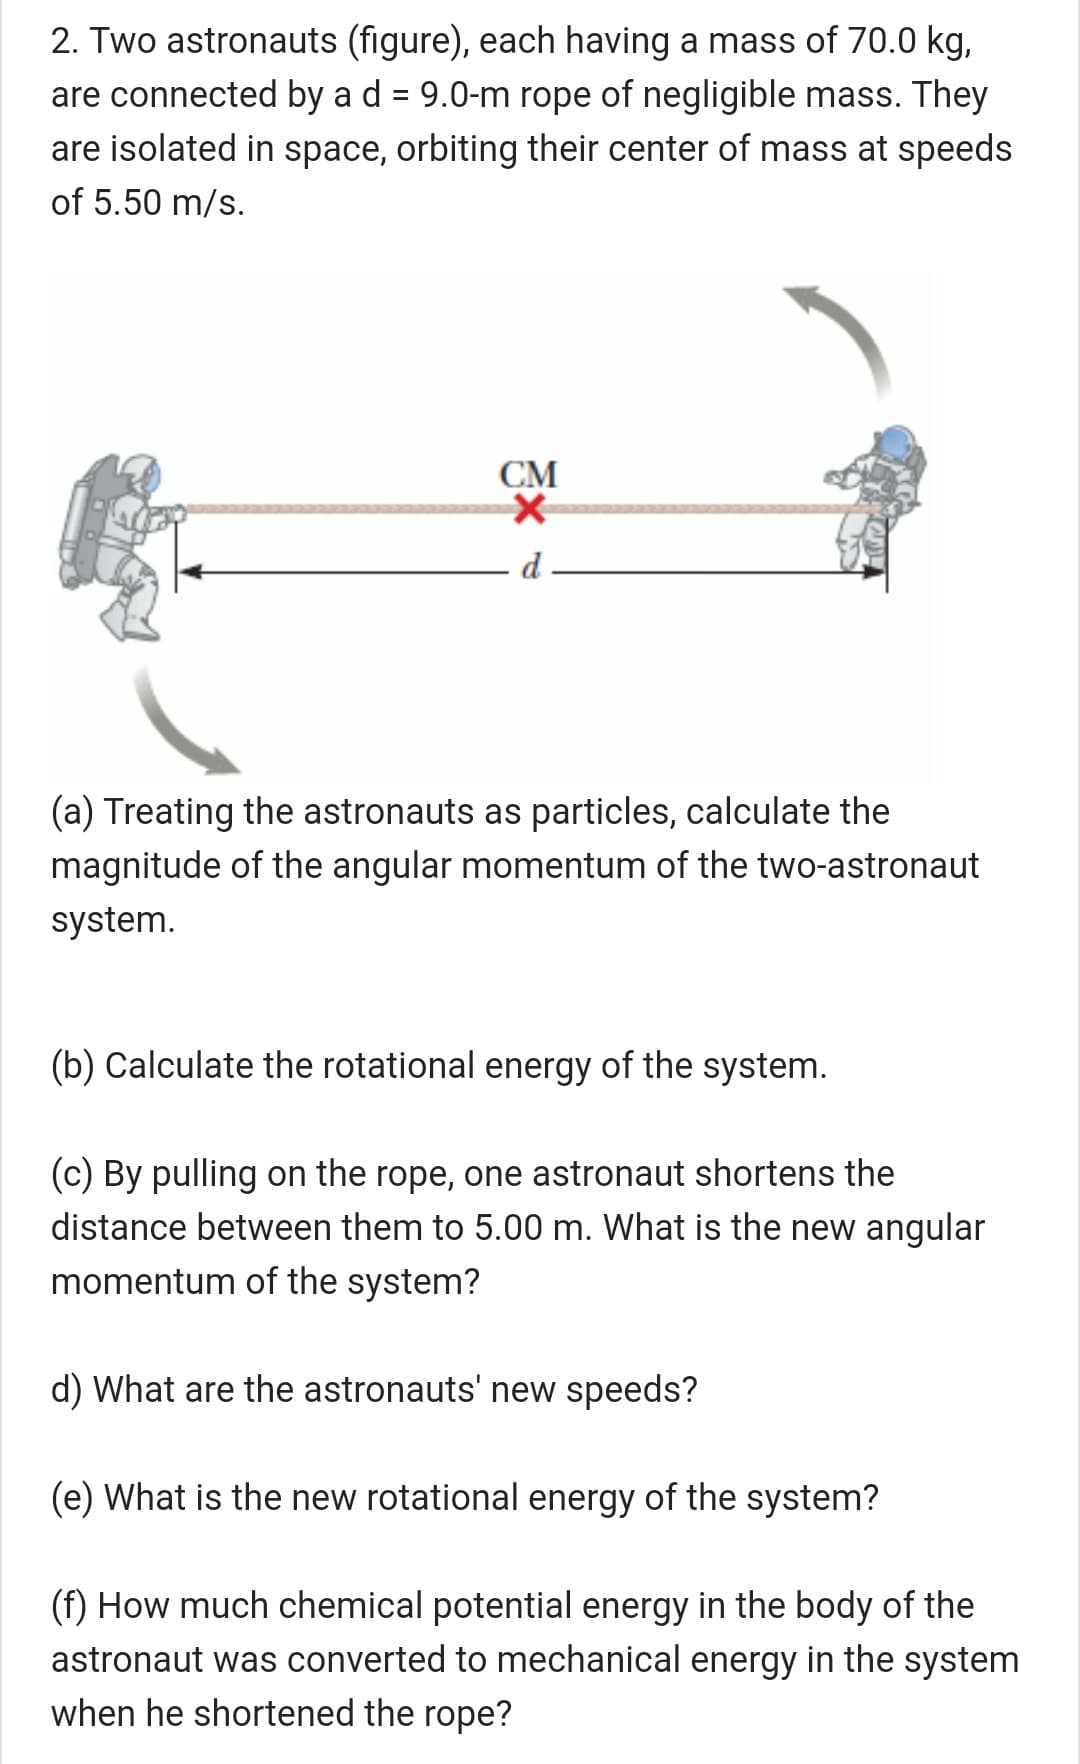 2. Two astronauts (figure), each having a mass of 70.0 kg,
are connected by a d = 9.0-m rope of negligible mass. They
are isolated in space, orbiting their center of mass at speeds
of 5.50 m/s.
СМ
d
(a) Treating the astronauts as particles, calculate the
magnitude of the angular momentum of the two-astronaut
system.
(b) Calculate the rotational energy of the system.
(c) By pulling on the rope, one astronaut shortens the
distance between them to 5.00 m. What is the new angular
momentum of the system?
d) What are the astronauts' new speeds?
(e) What is the new rotational energy of the system?
(f) How much chemical potential energy in the body of the
astronaut was converted to mechanical energy in the system
when he shortened the rope?
